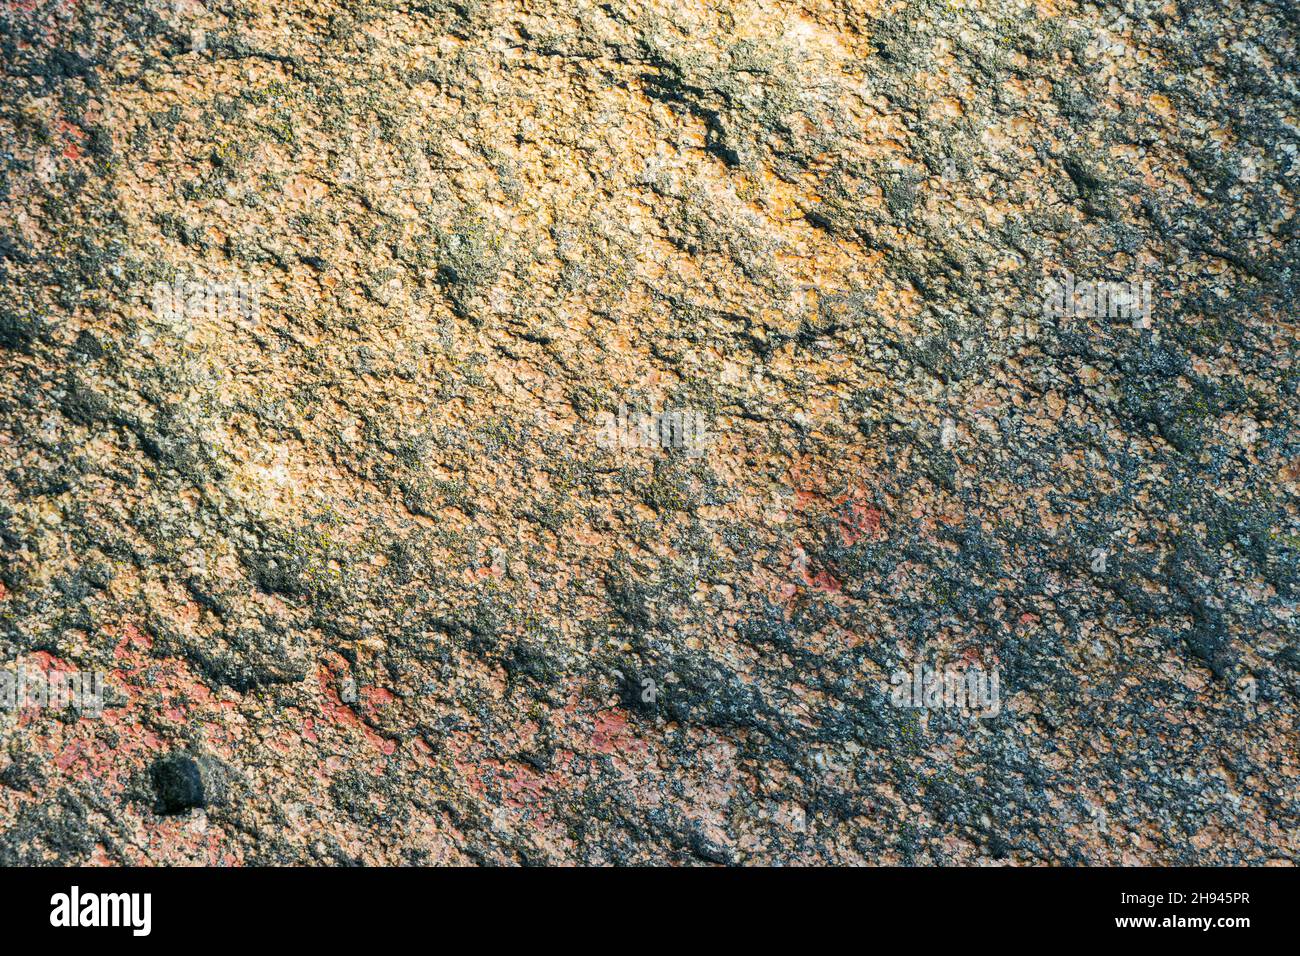 Granite texture. Natural rock texture. Abstract stone background. Earth colors Stock Photo